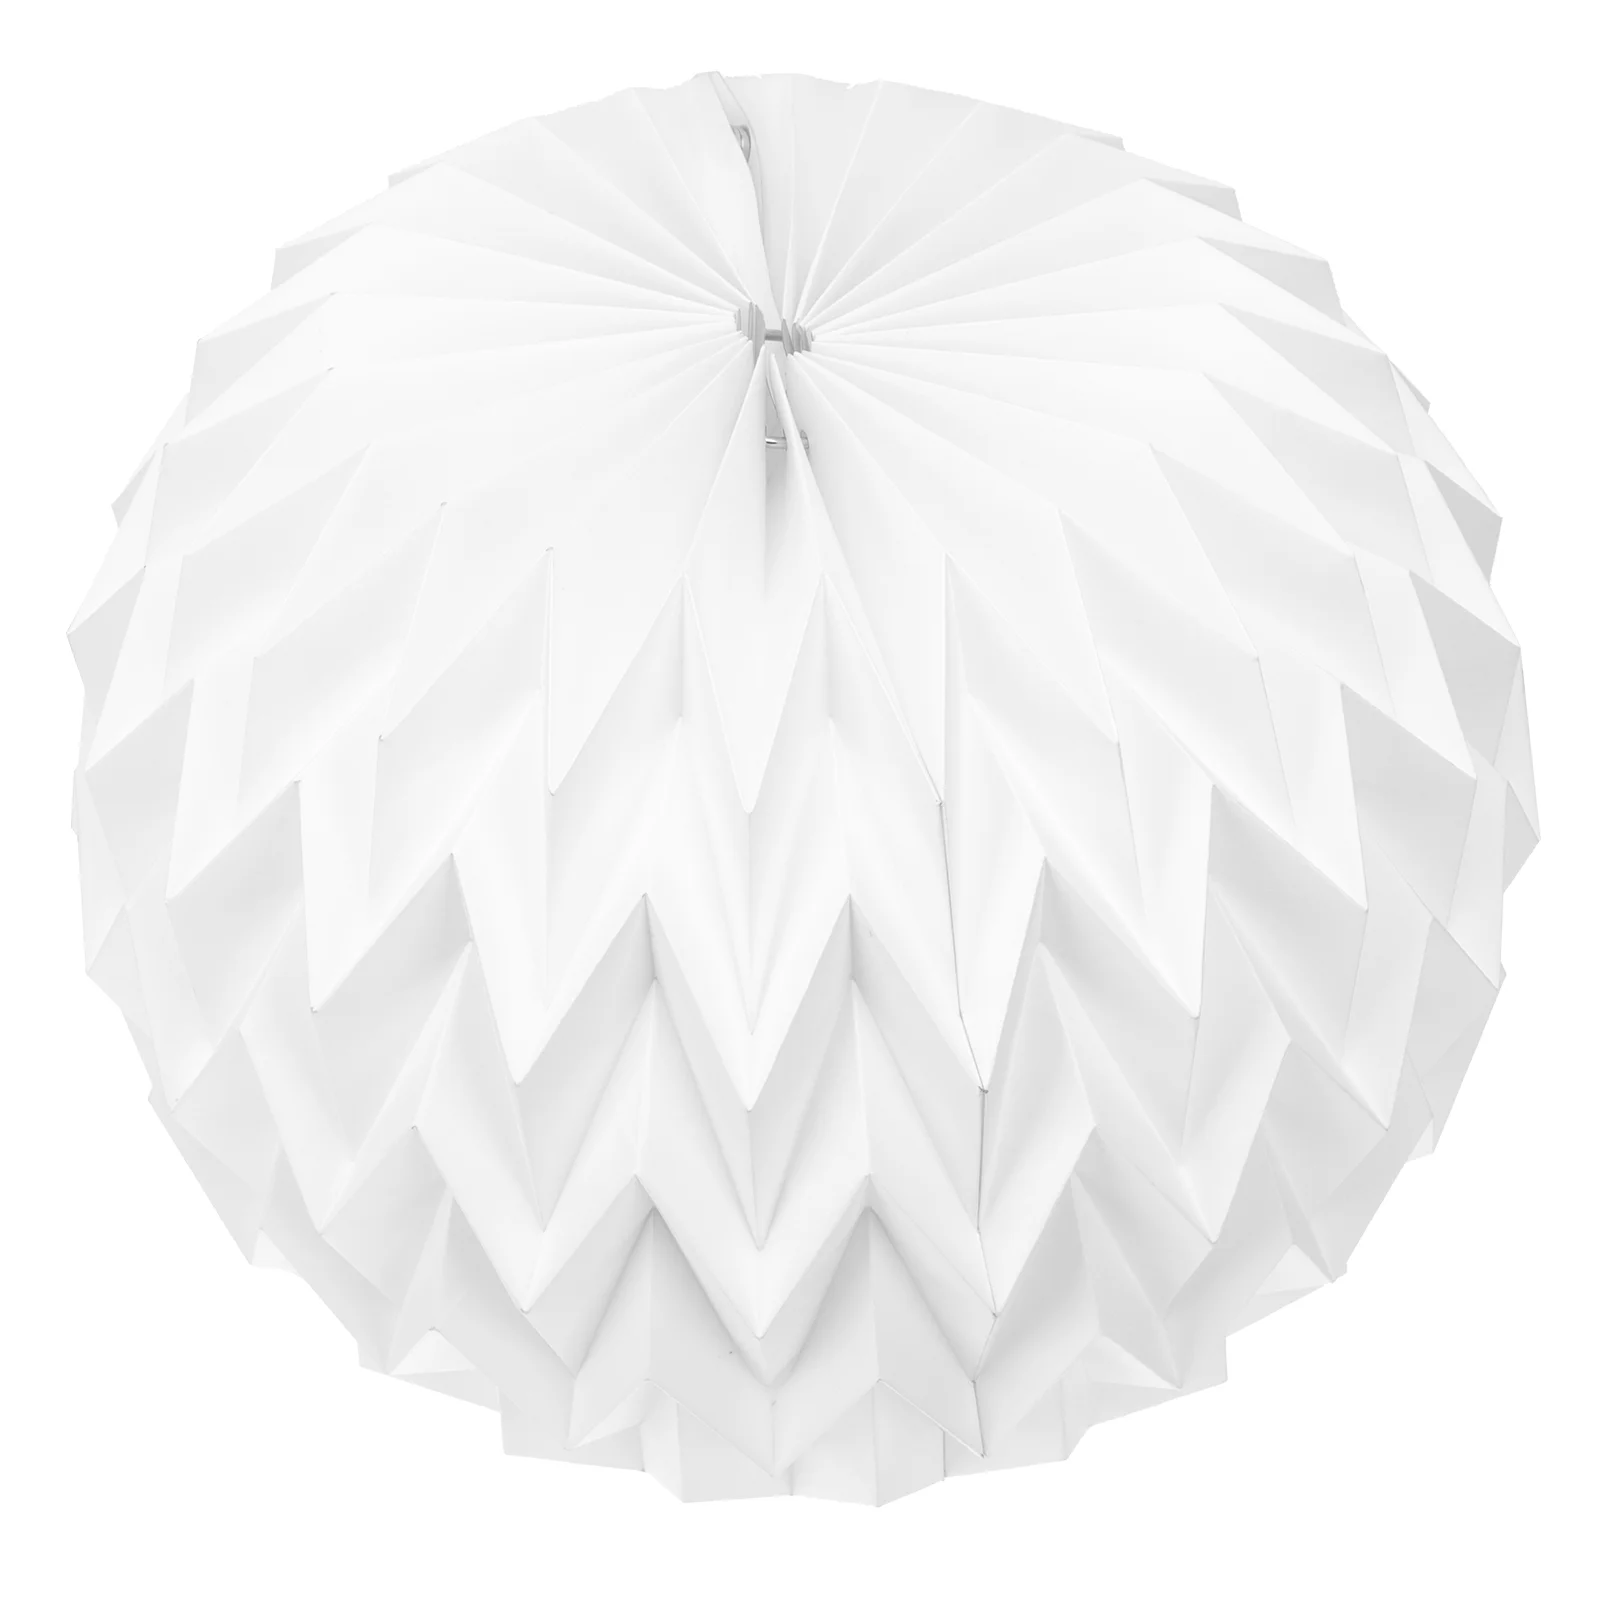 

Lampshade Cafe Decorative Light Cover Accessory Concise Nordic Style Ornament Delicate Paper Craft